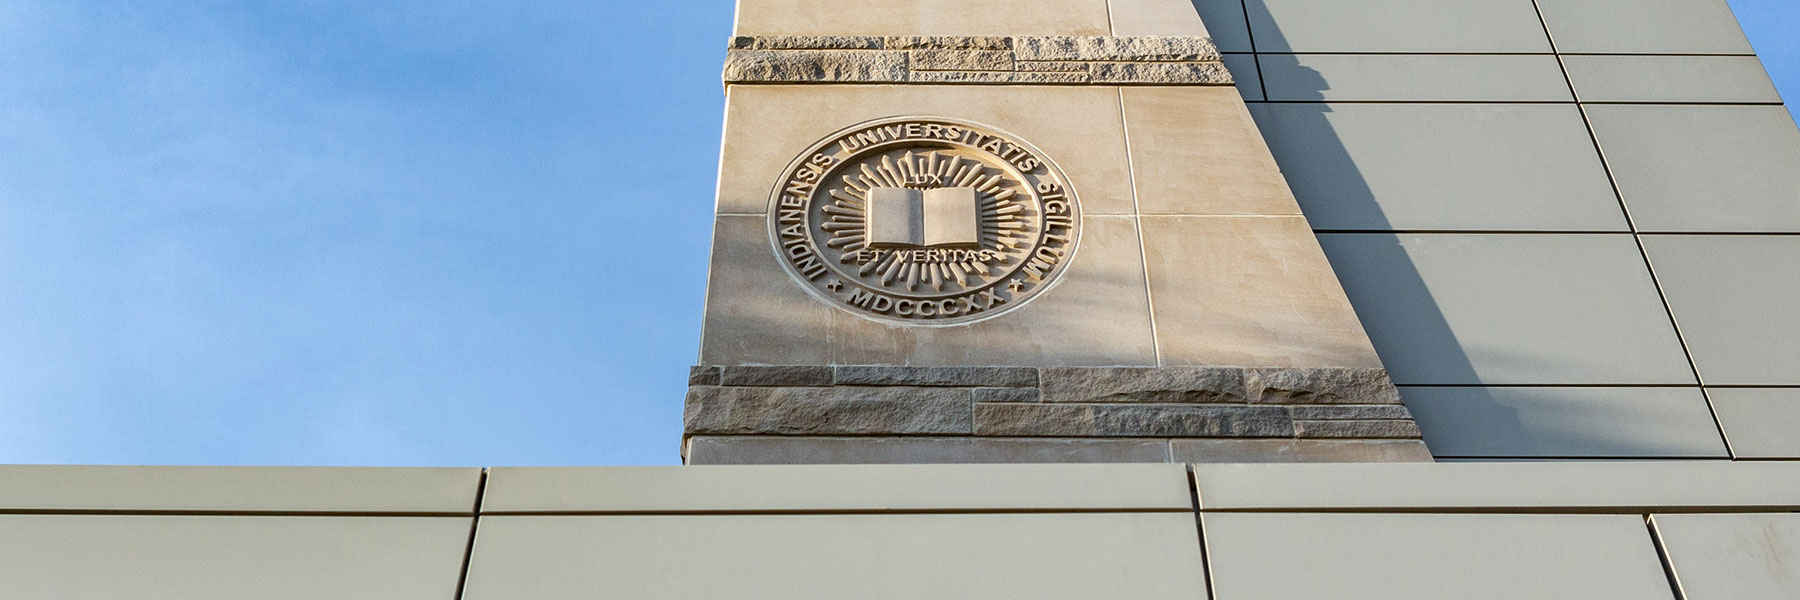 The Indiana University seal on a limestone building.